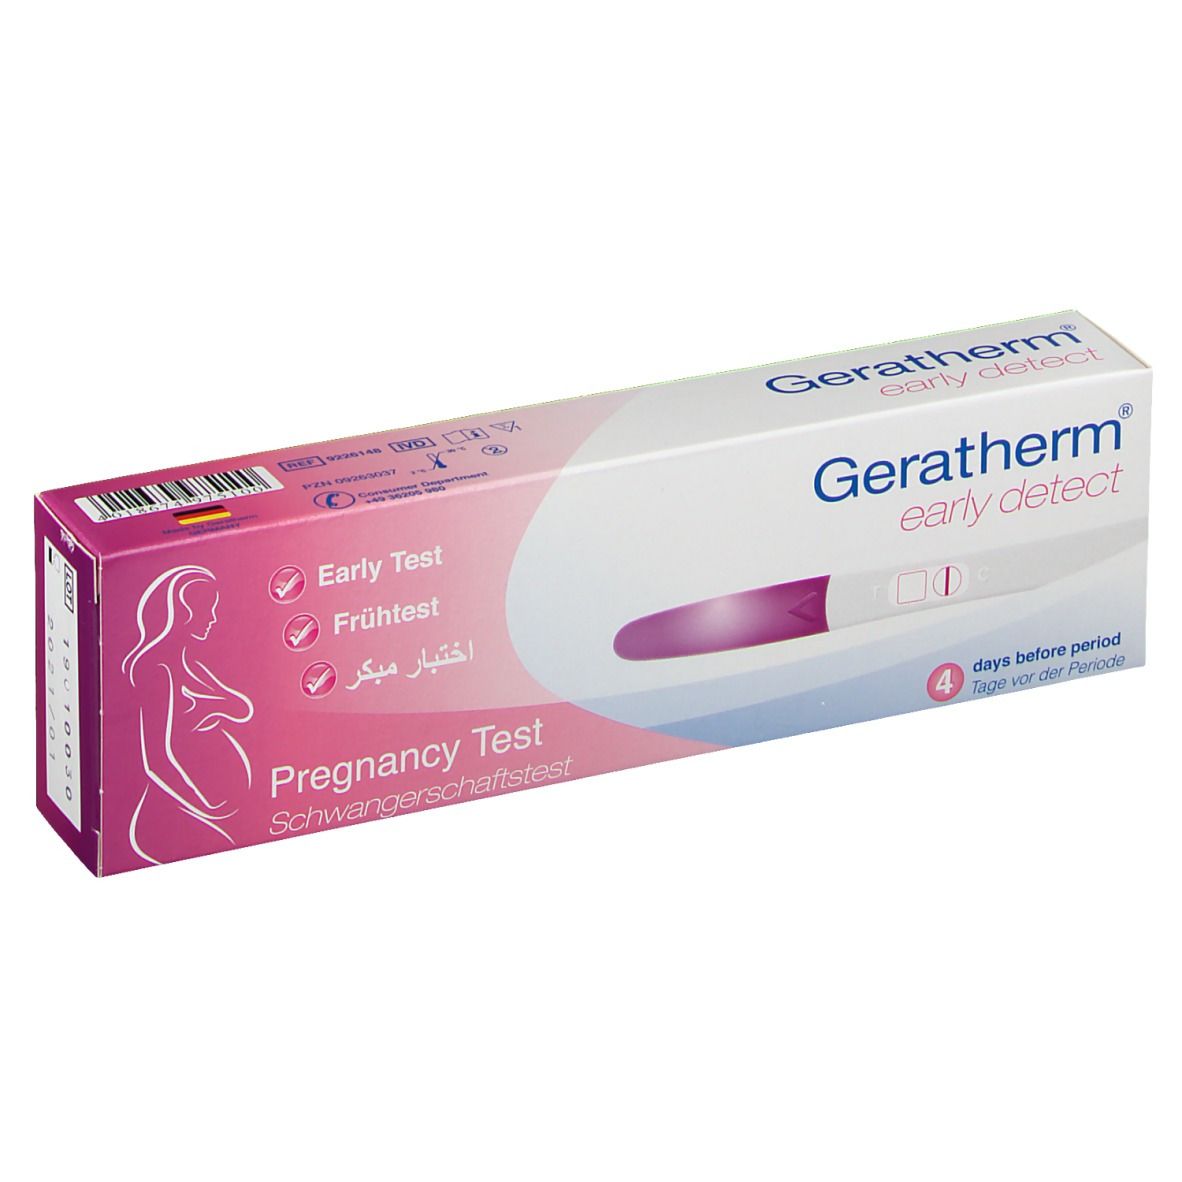 Geratherm® early detect